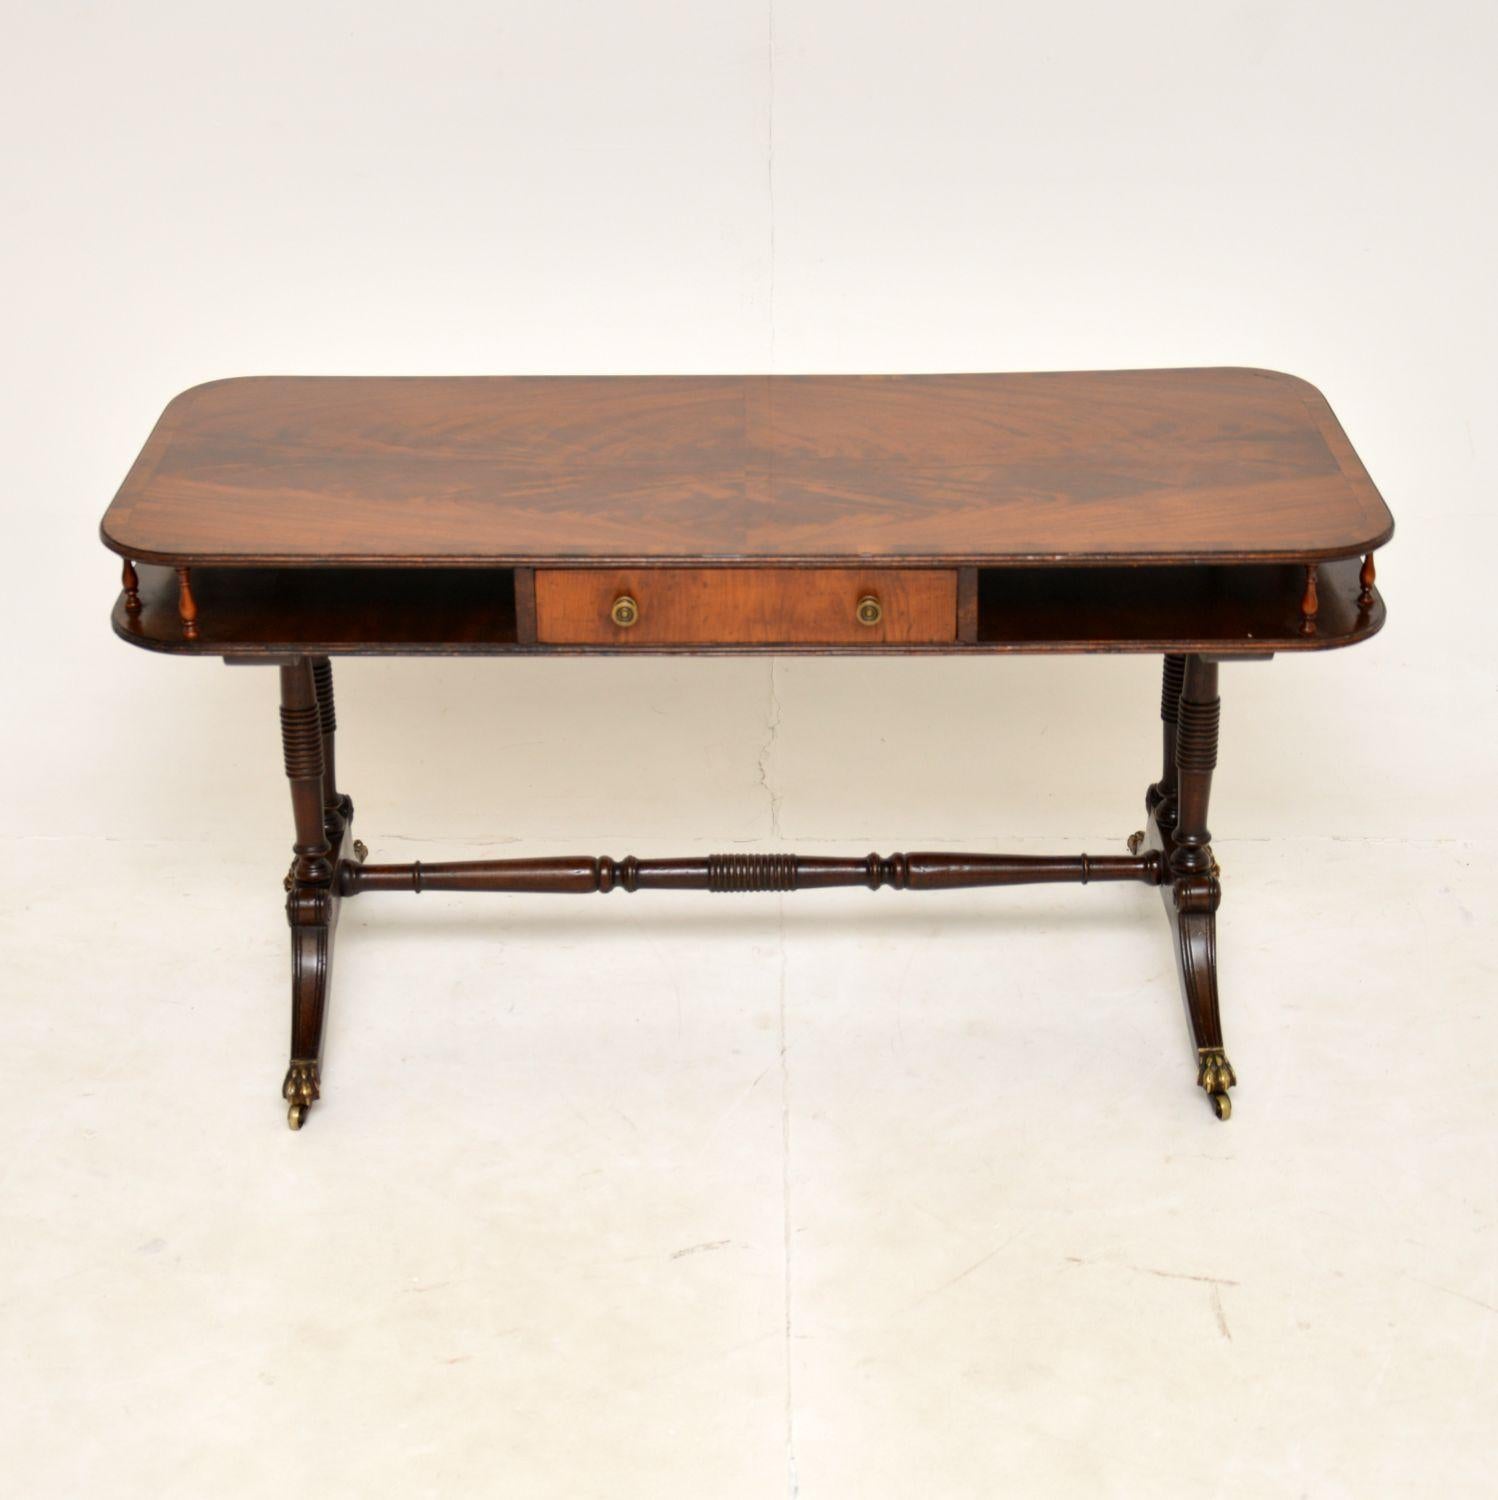 An impressive and extremely well made antique coffee table. This is in the Regency style, it dates from the 1920-30’s.

The quality is fantastic and this is a very useful size. There is a central drawer and an open lower tier on either side of the